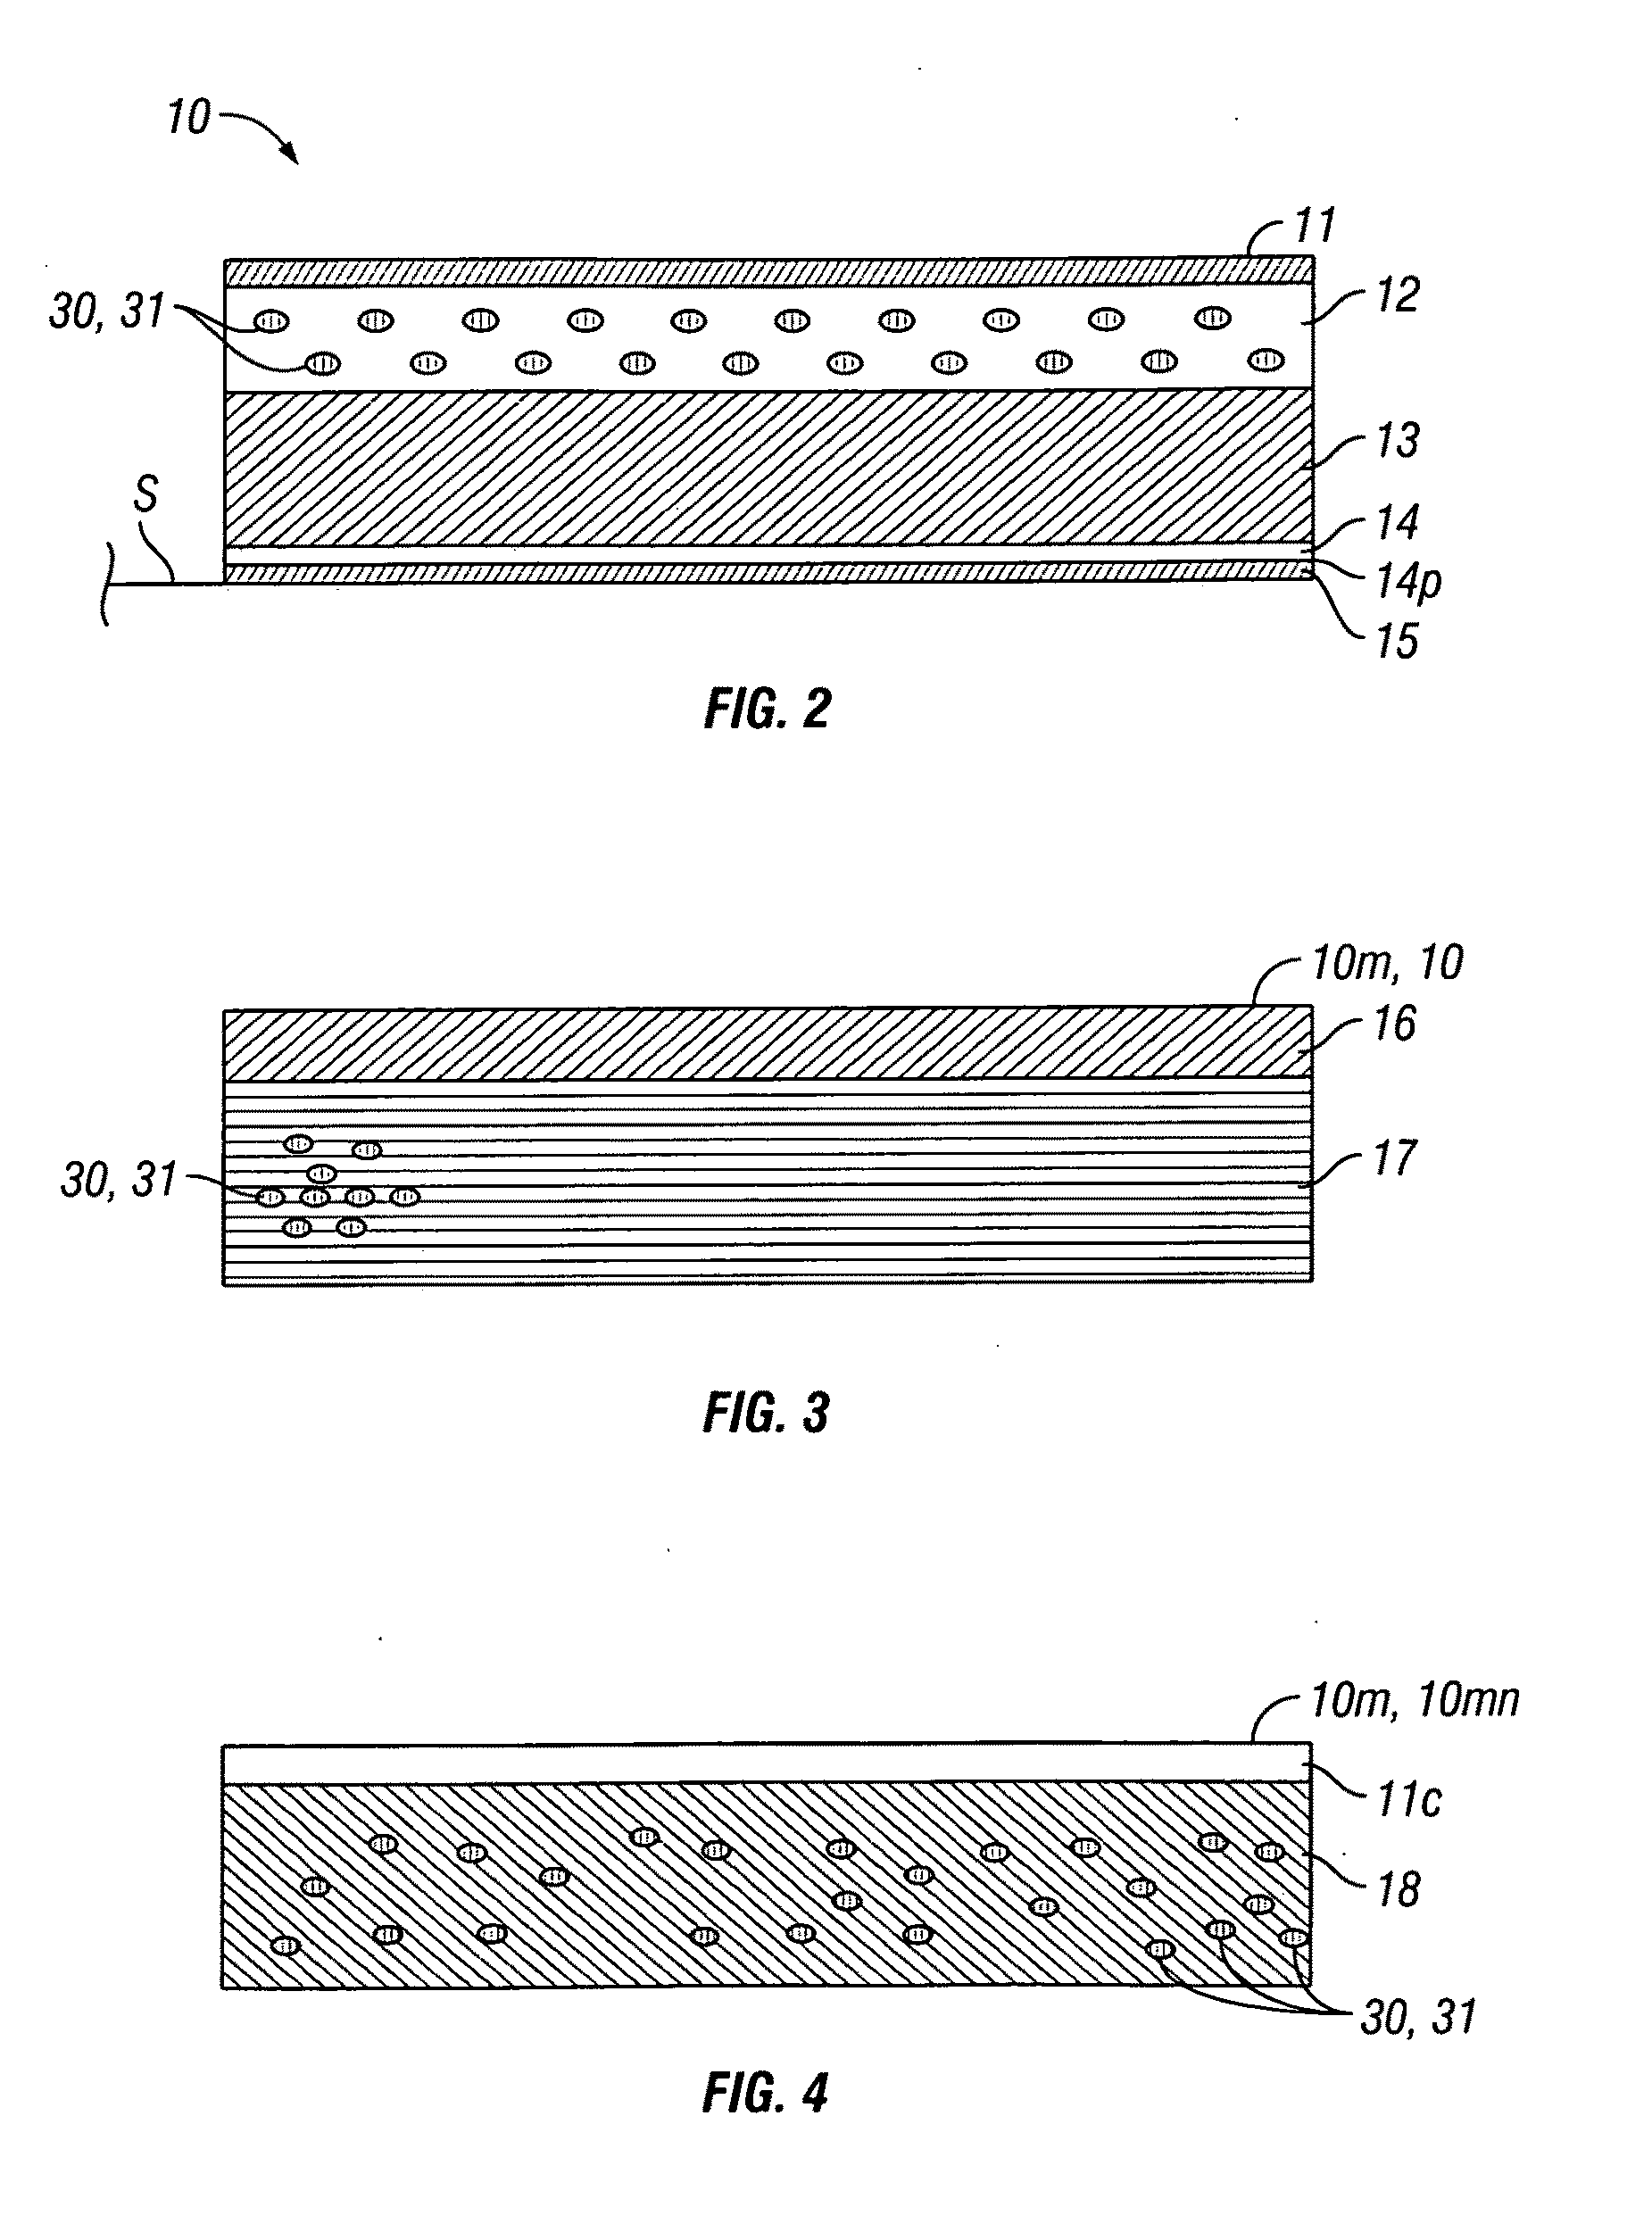 Patches and methods for the transdermal delivery of a therapeutically effective amount of iron